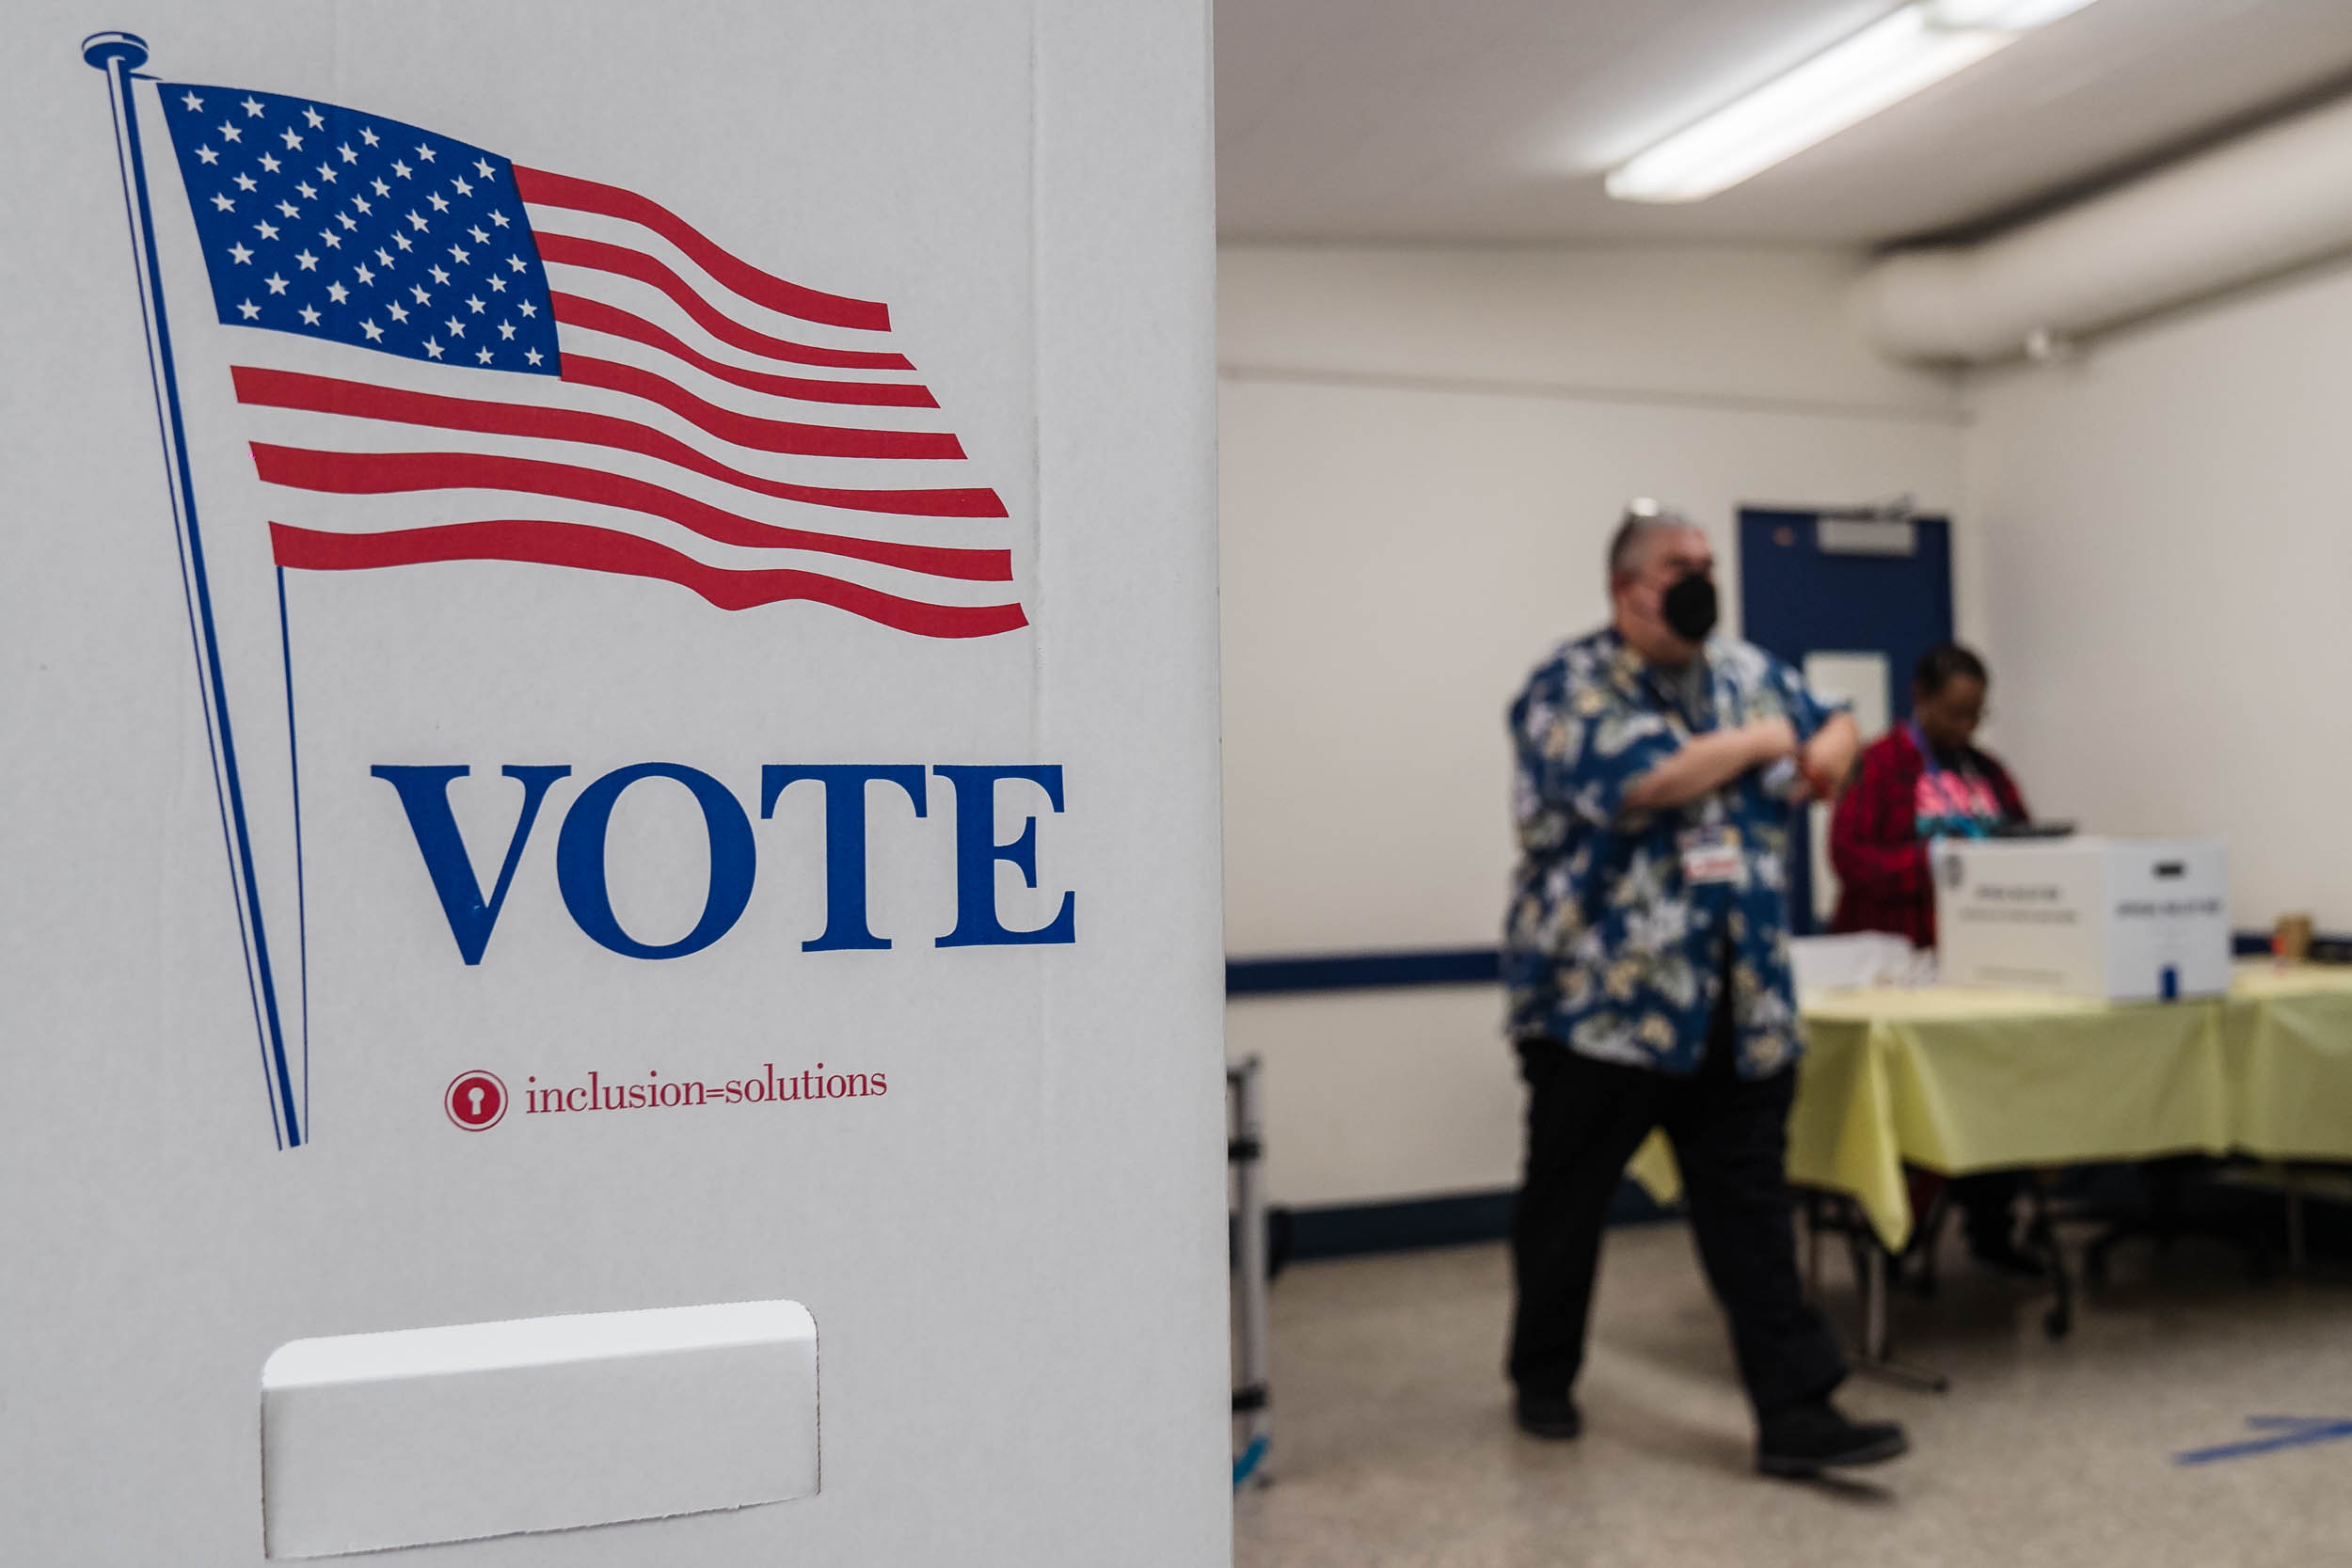 A polling station at Golden Hill Recreation Center on Nov. 8, 2022. / Photo by Ariana Drehsler